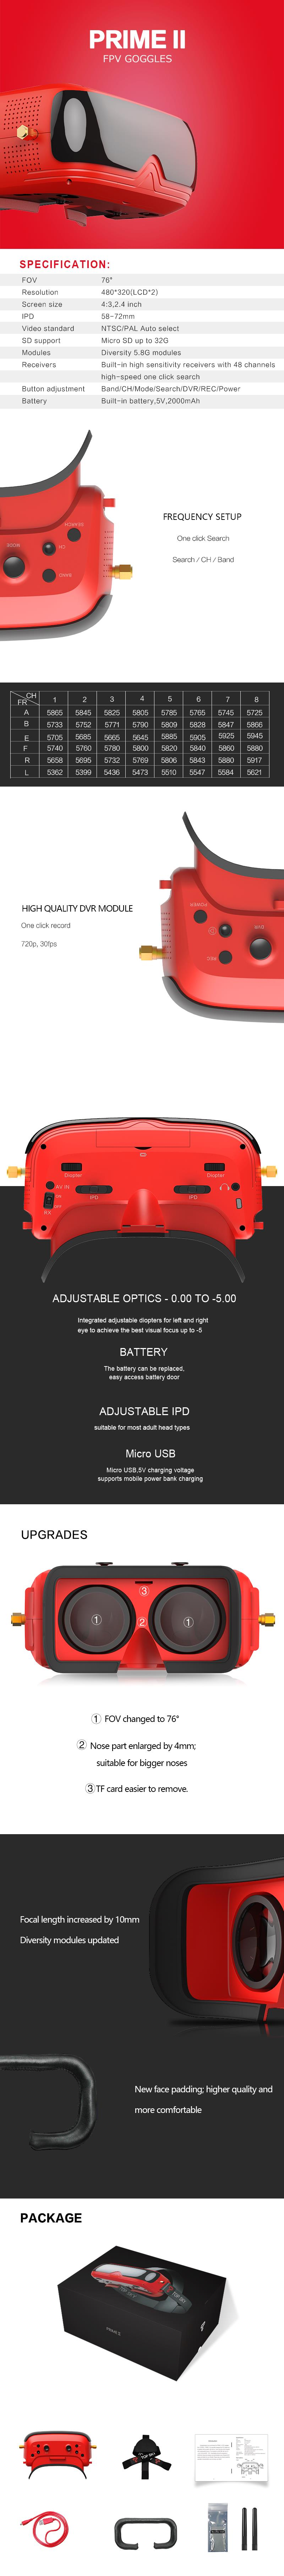 TOPSKY PRIME II FPV Goggles 480*320 Display 58-72mm IPD 5.8Ghz 48CH Diversity RF with DVR Built-in Replaceable 5V 2000mAh Battery for FPV Racing Drone